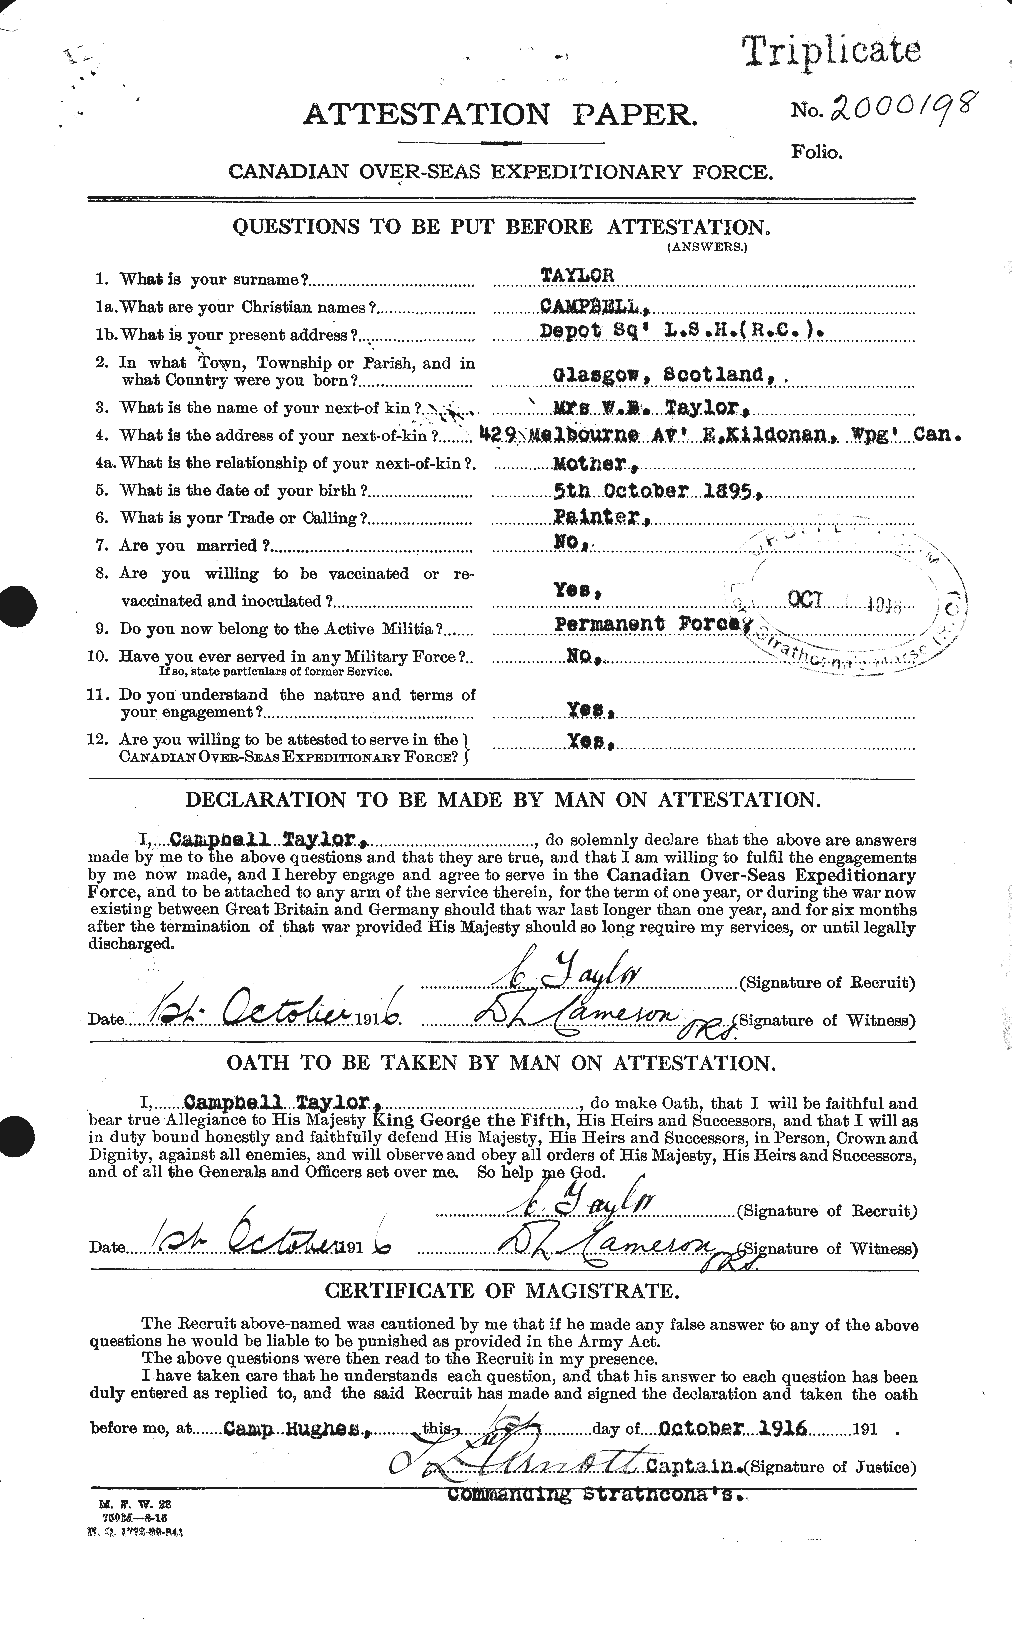 Personnel Records of the First World War - CEF 626782a